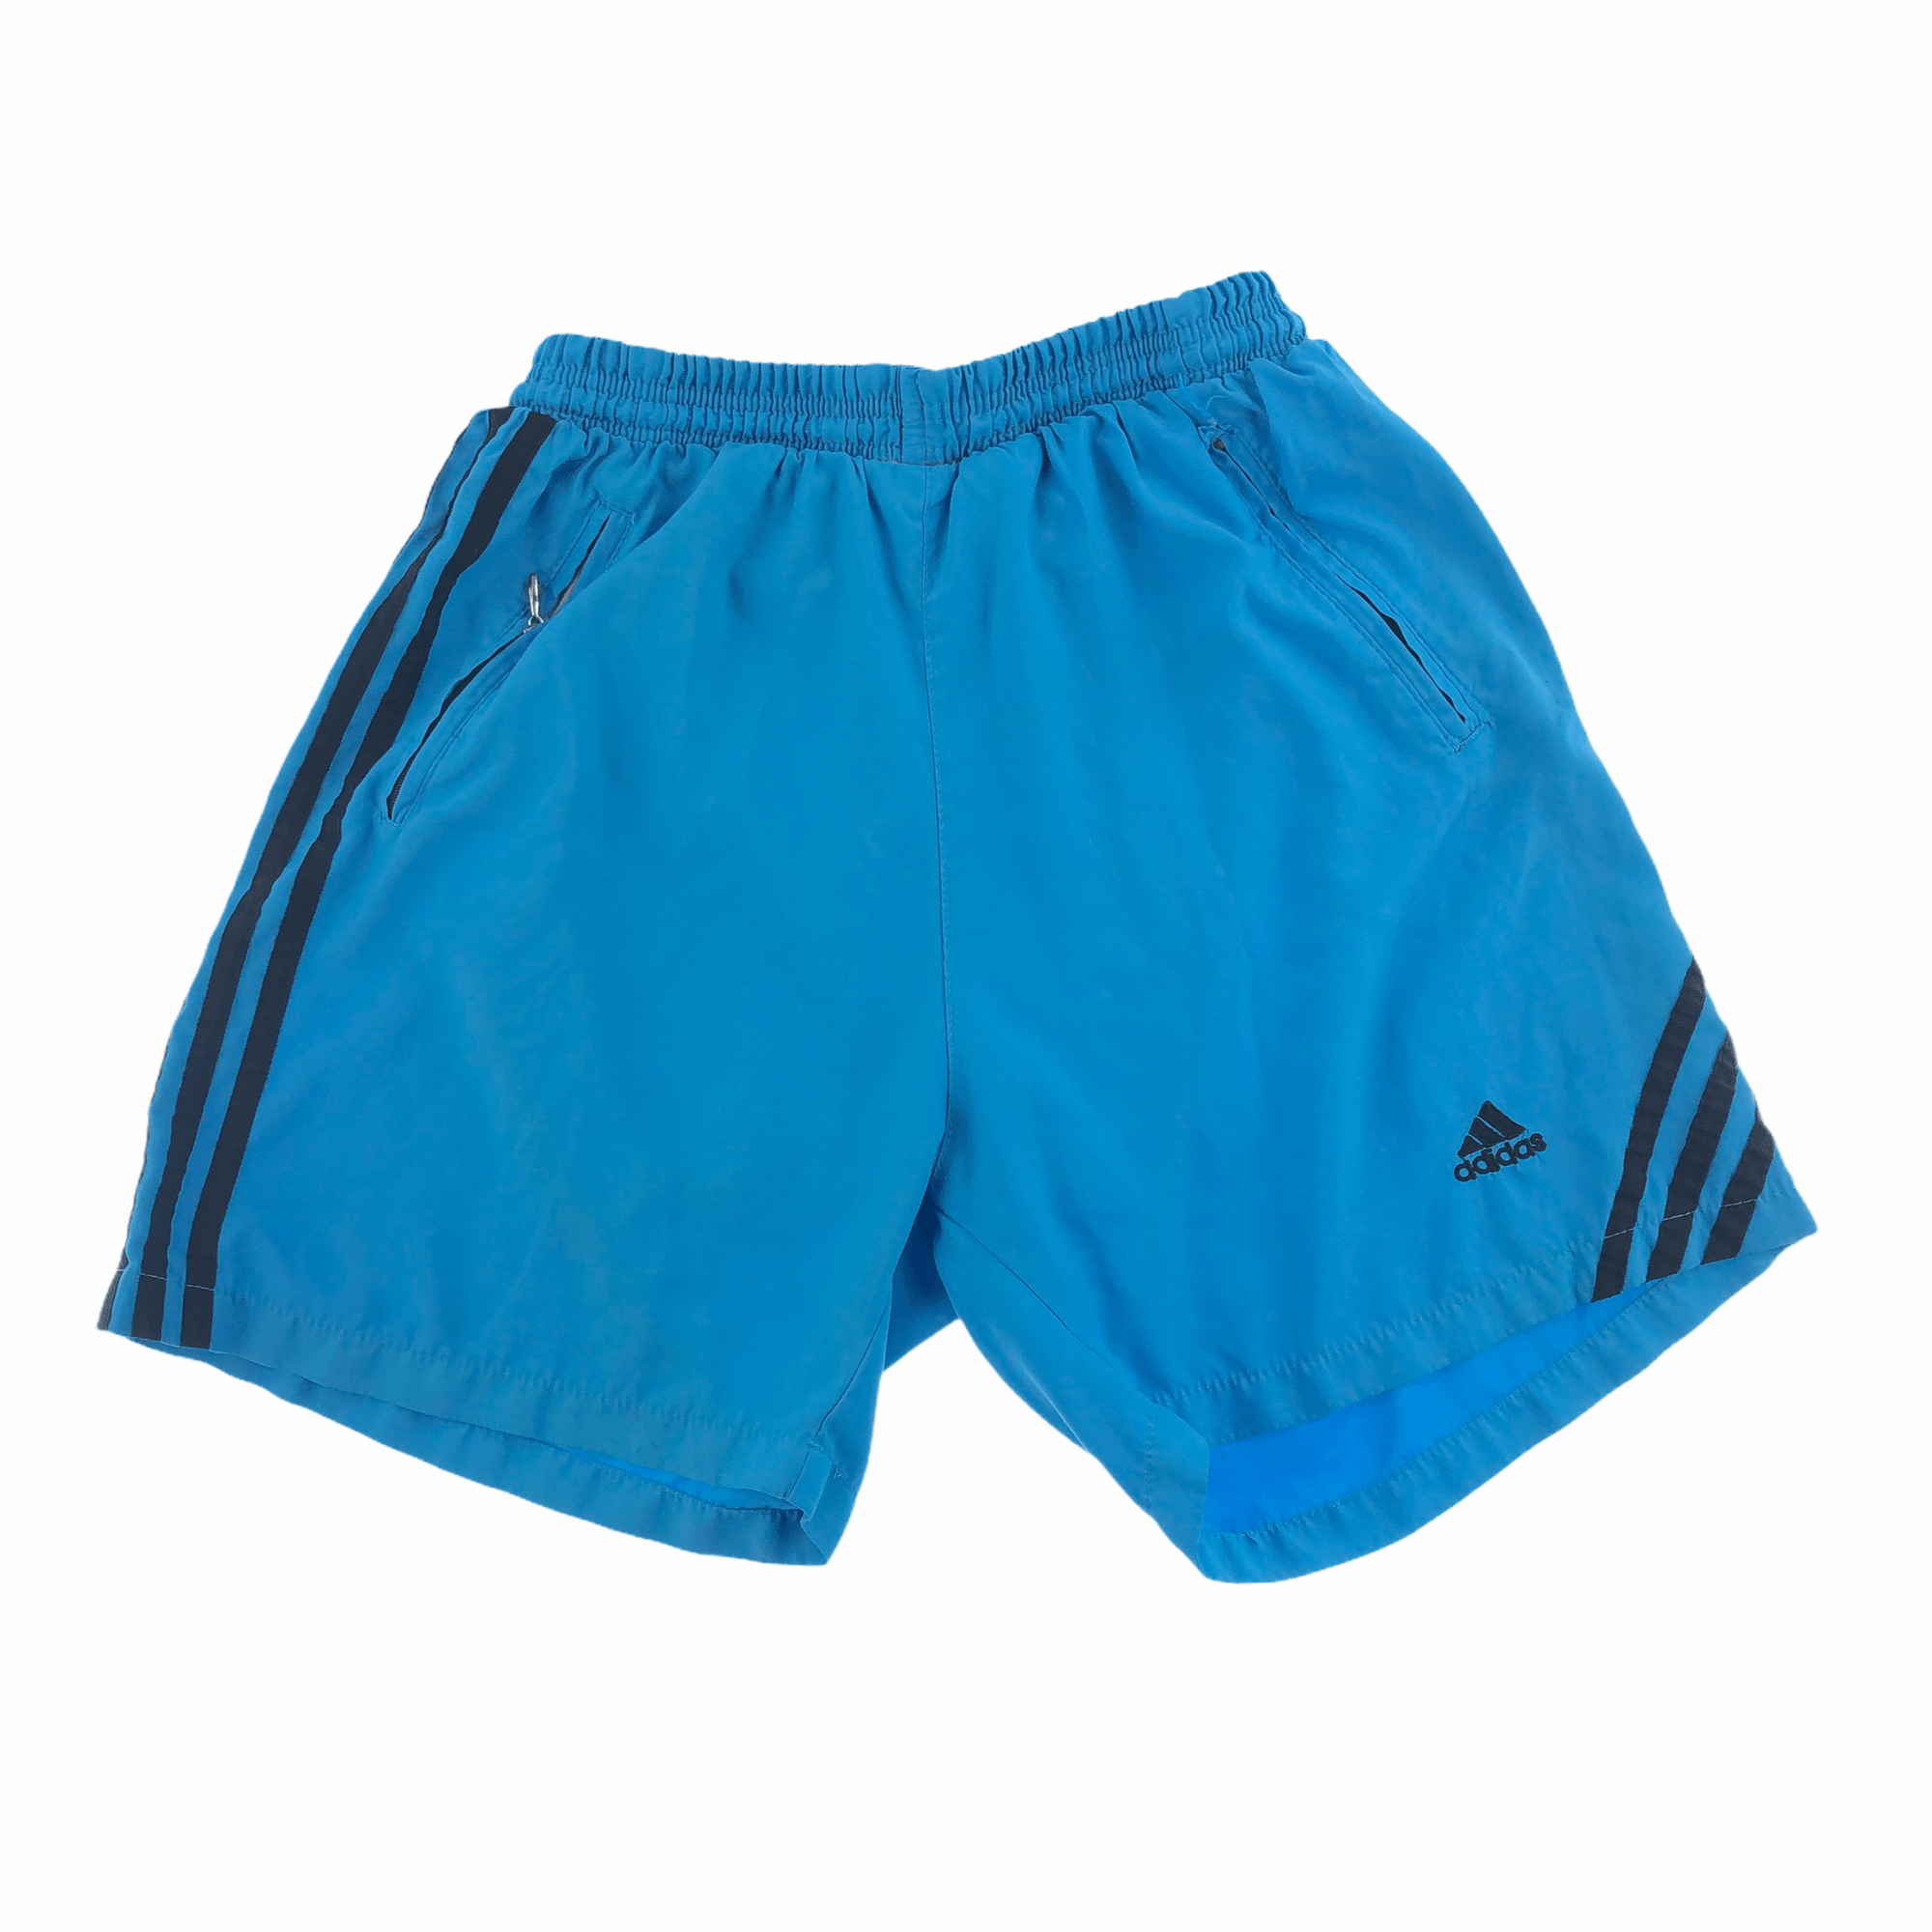 ADIDAS SHORTS - second wave vintage store